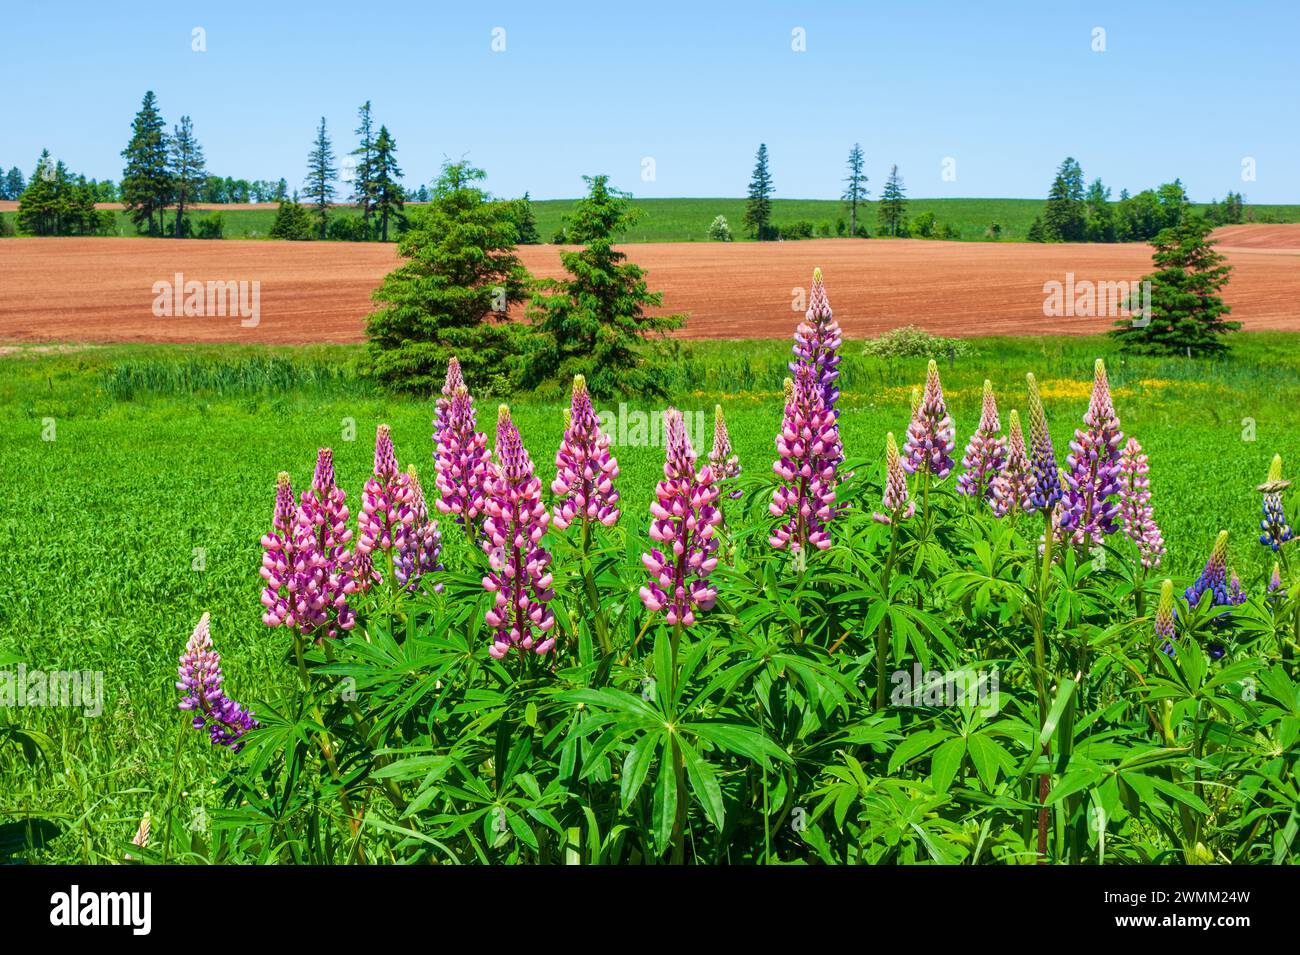 Colorful lupine flowers in shades of pink and purple. Farmlands with green and plowed fields, spotted with spruce trees. Prince Edward Island, Canada. Stock Photo